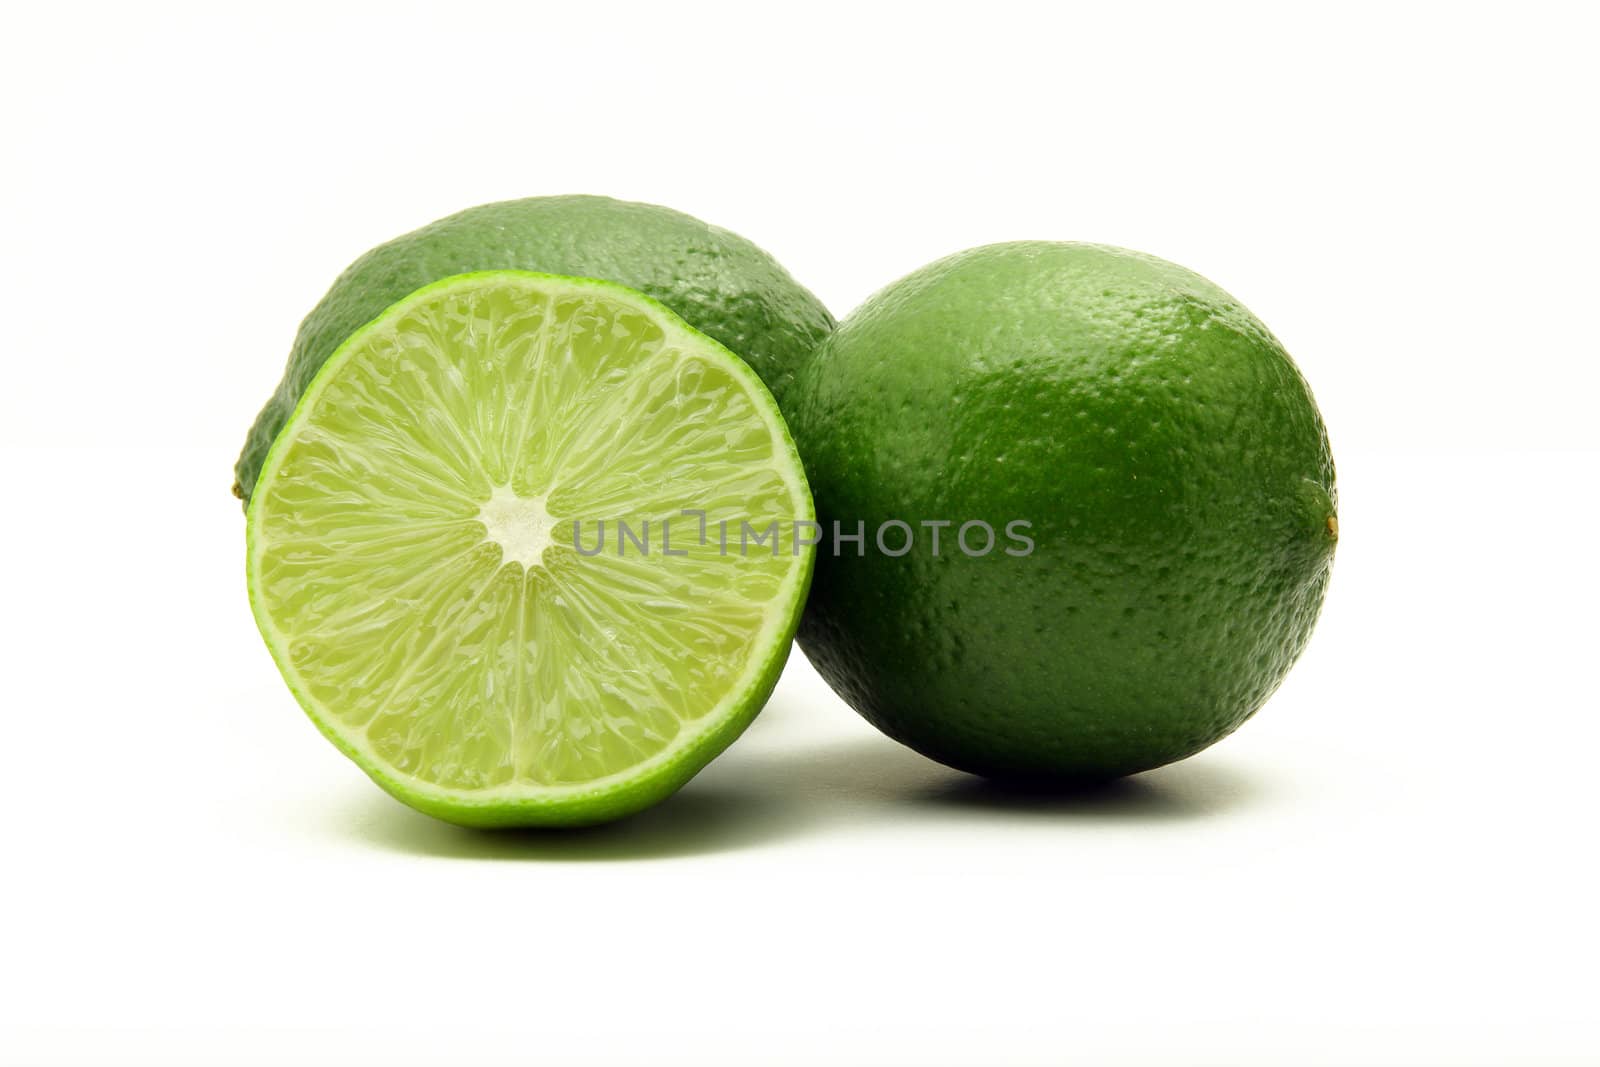 Three green juicy limes isolated on white background, one cut in half